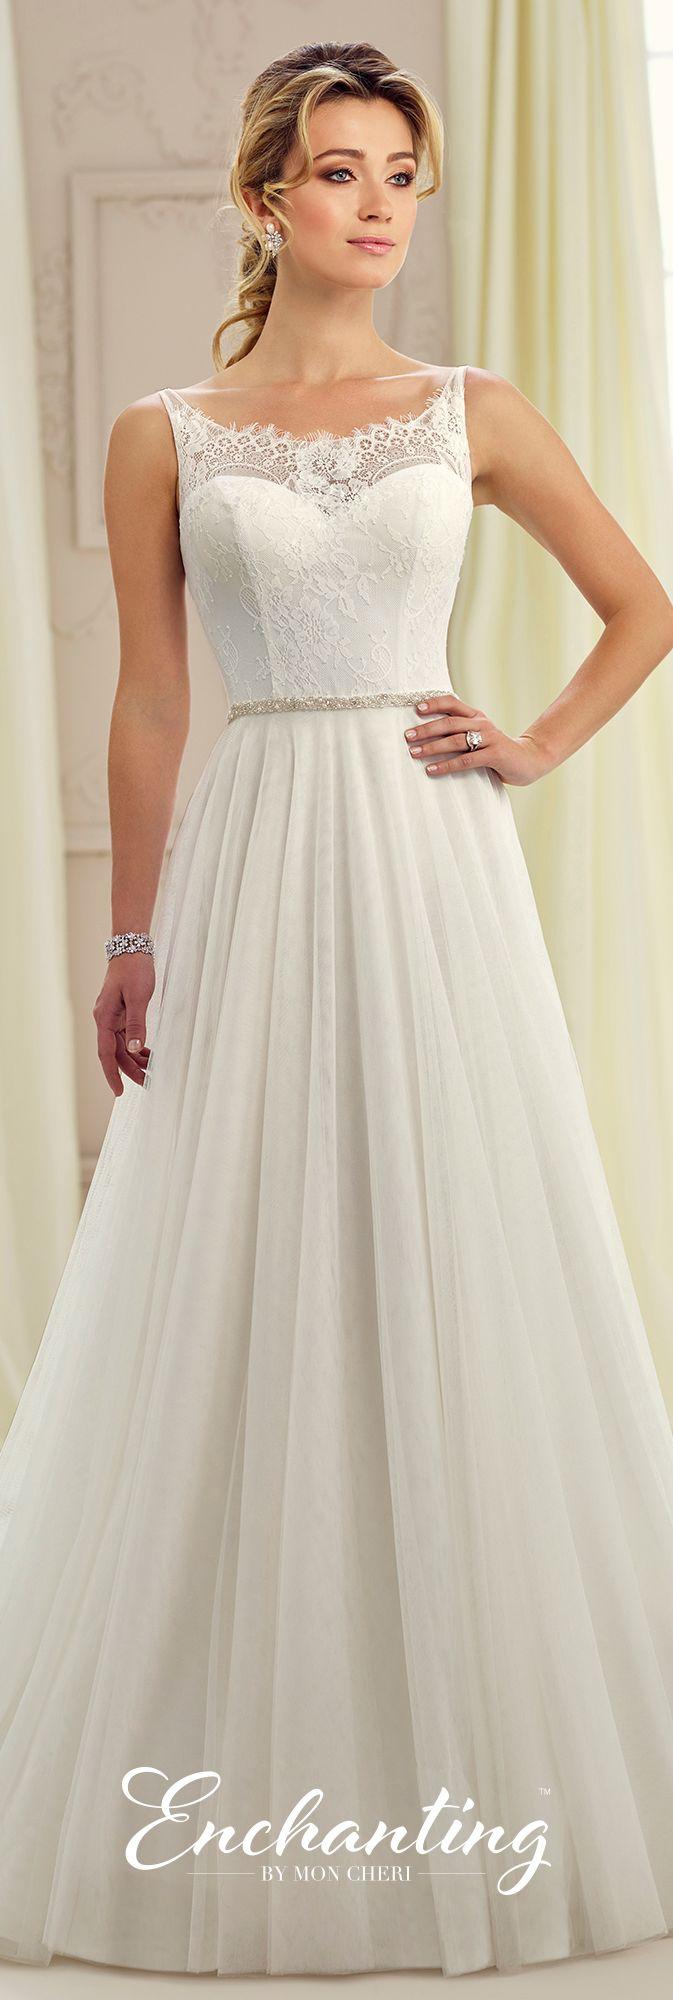 Hochzeit - Sleeveless Lace A-Line Wedding Gown - Enchanting By Mon Cheri 217105